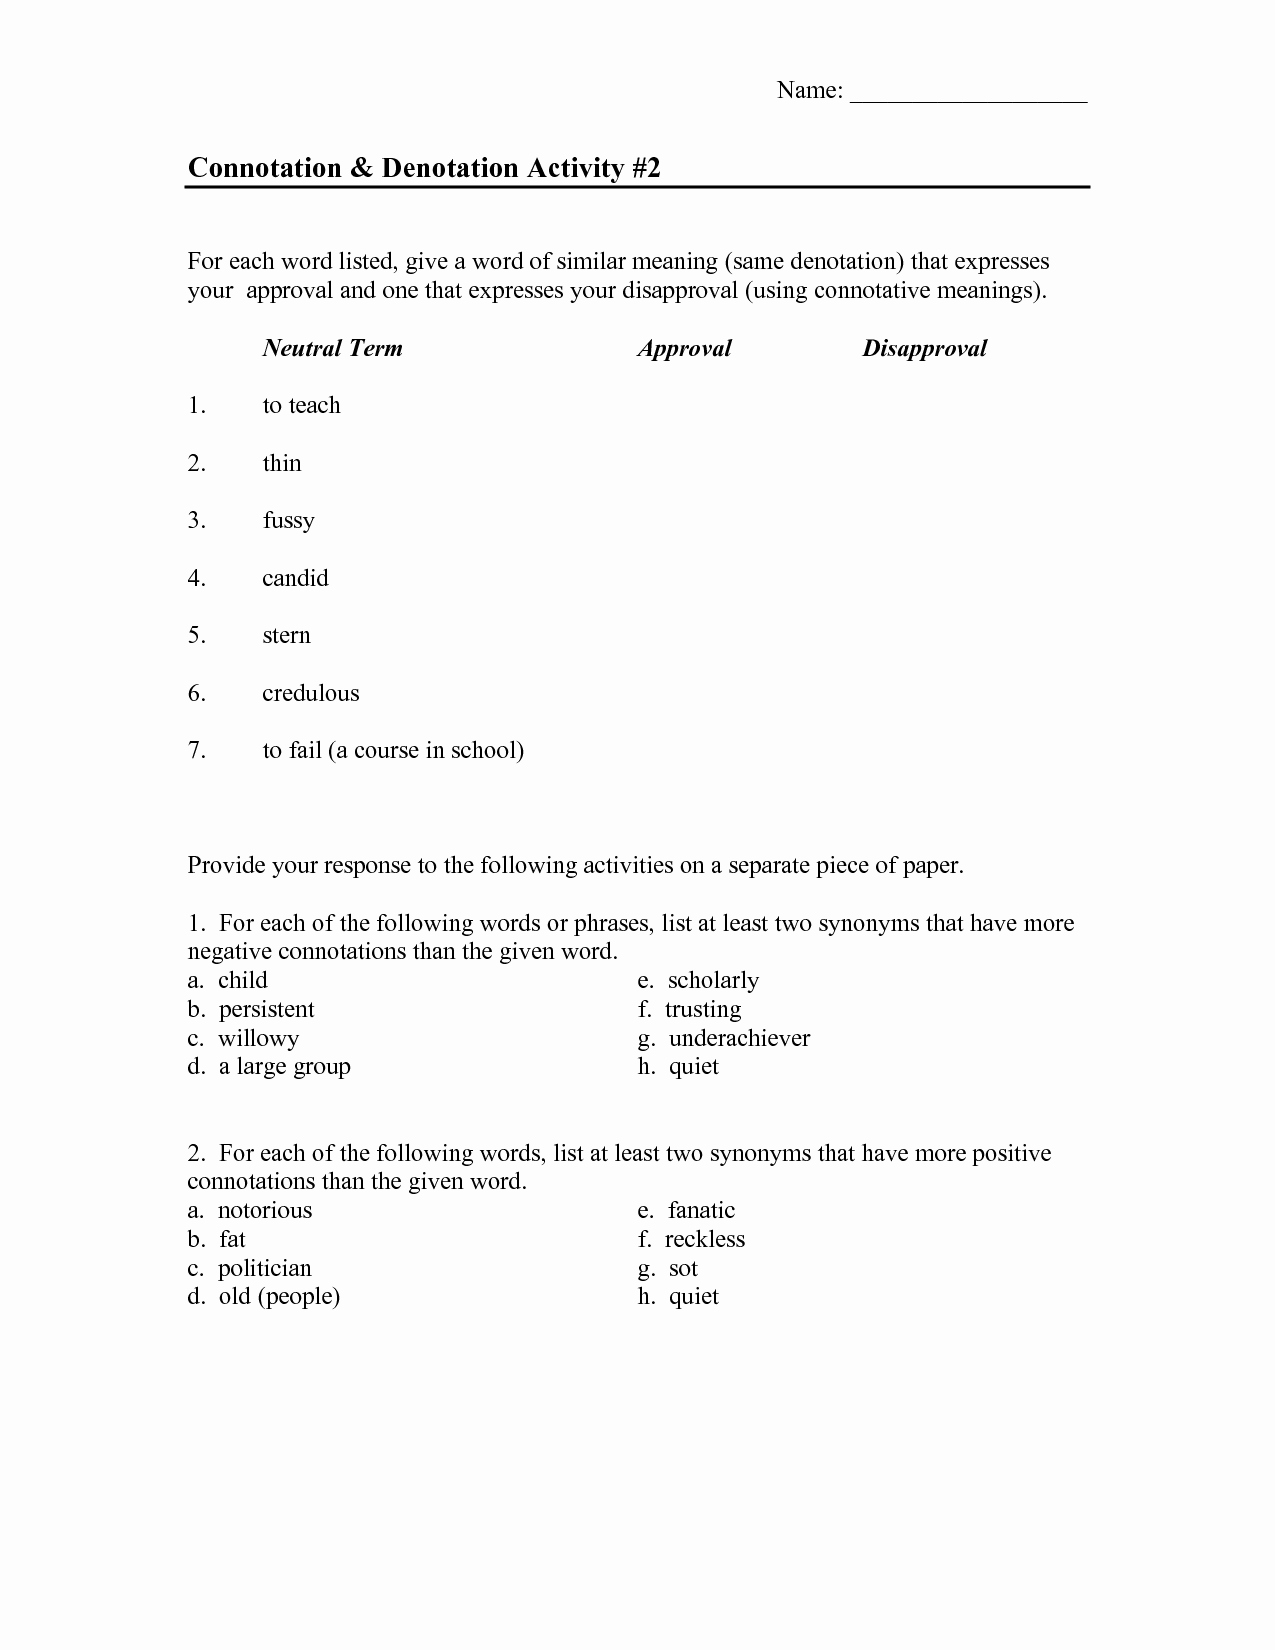 Denotation and Connotation Worksheet Luxury Connotation and Denotation Worksheets Google Search